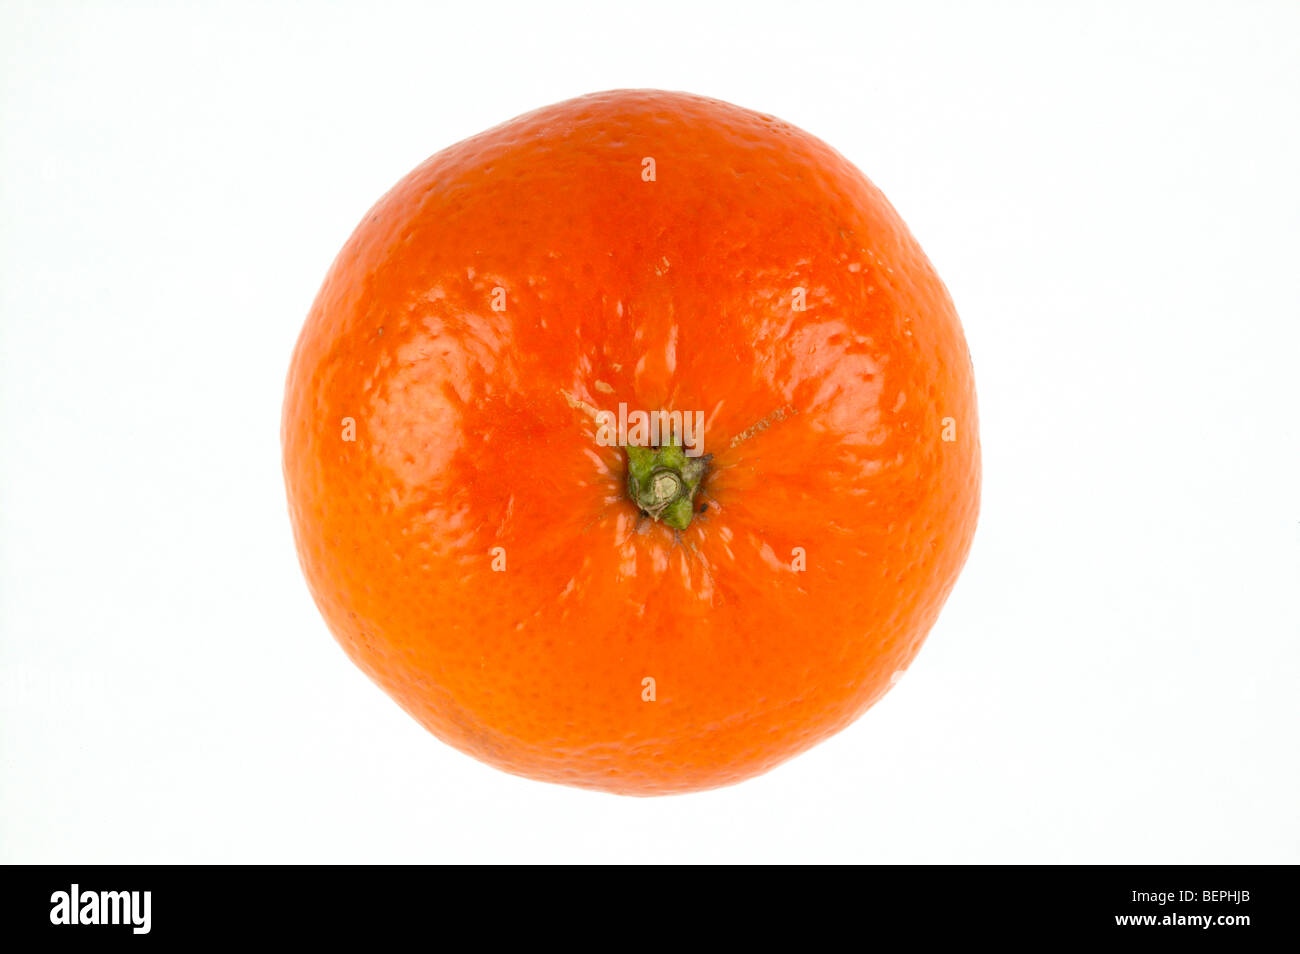 Studio shot of orange suspended in mid air with white background Stock Photo